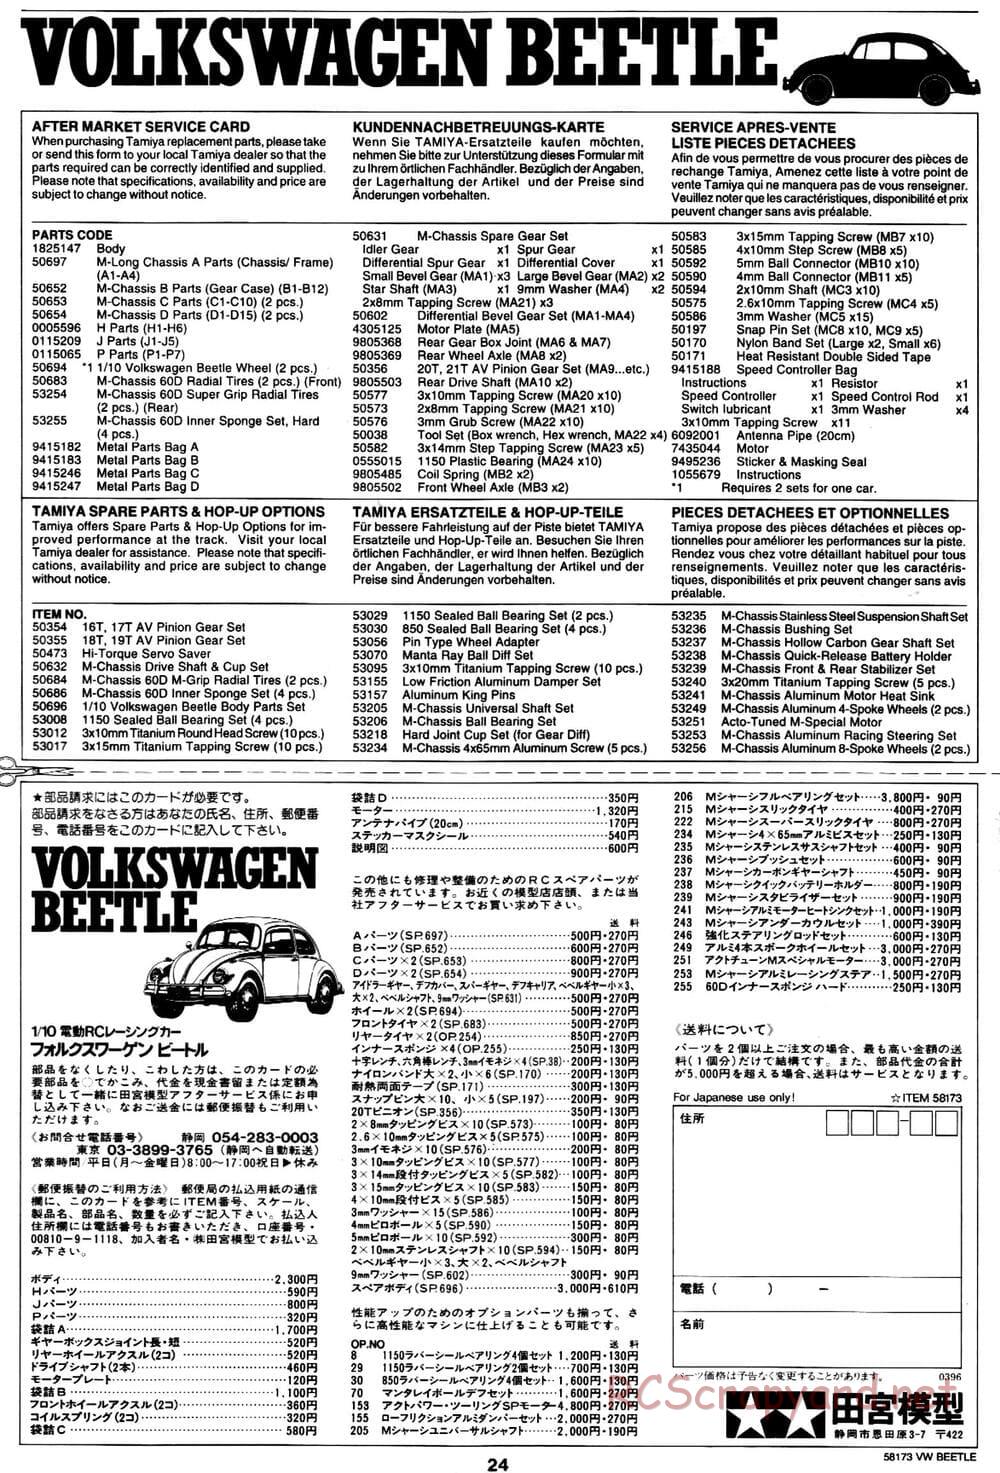 Tamiya - Volkswagen Beetle - M02L Chassis - Manual - Page 24